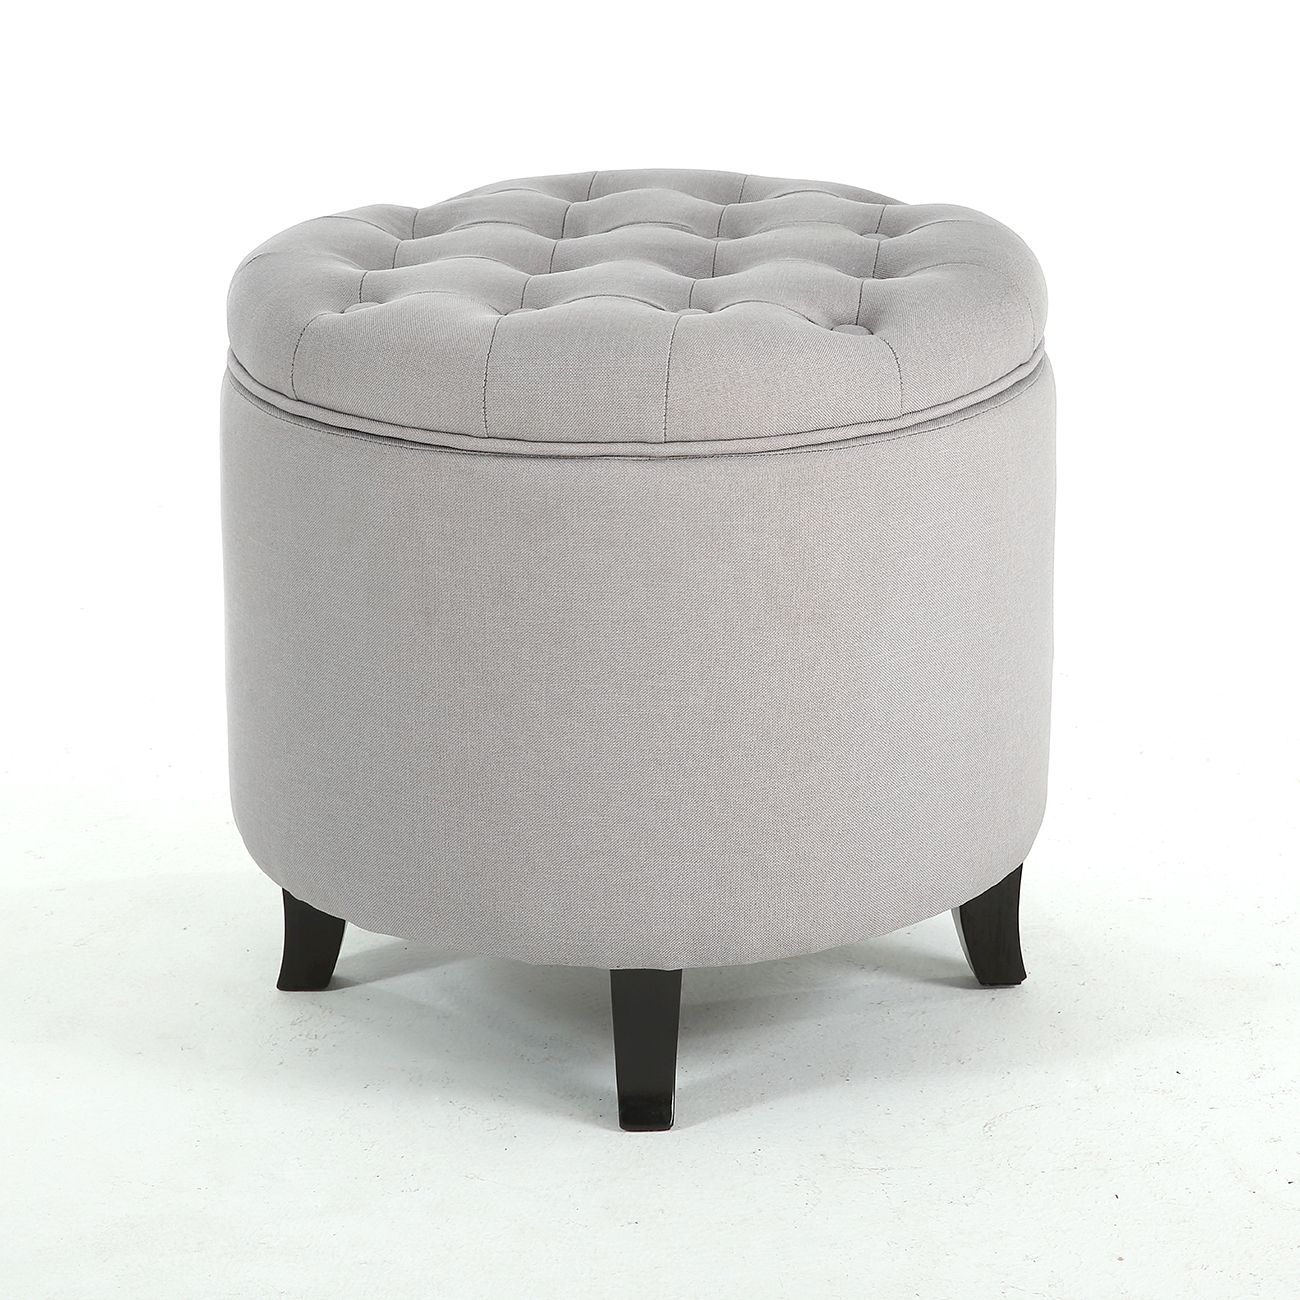 Recent Light Gray Fabric Tufted Round Storage Ottomans Throughout Classic Storage Ottoman Seat Nailhead Trim Large Round Tufted Table (View 7 of 10)